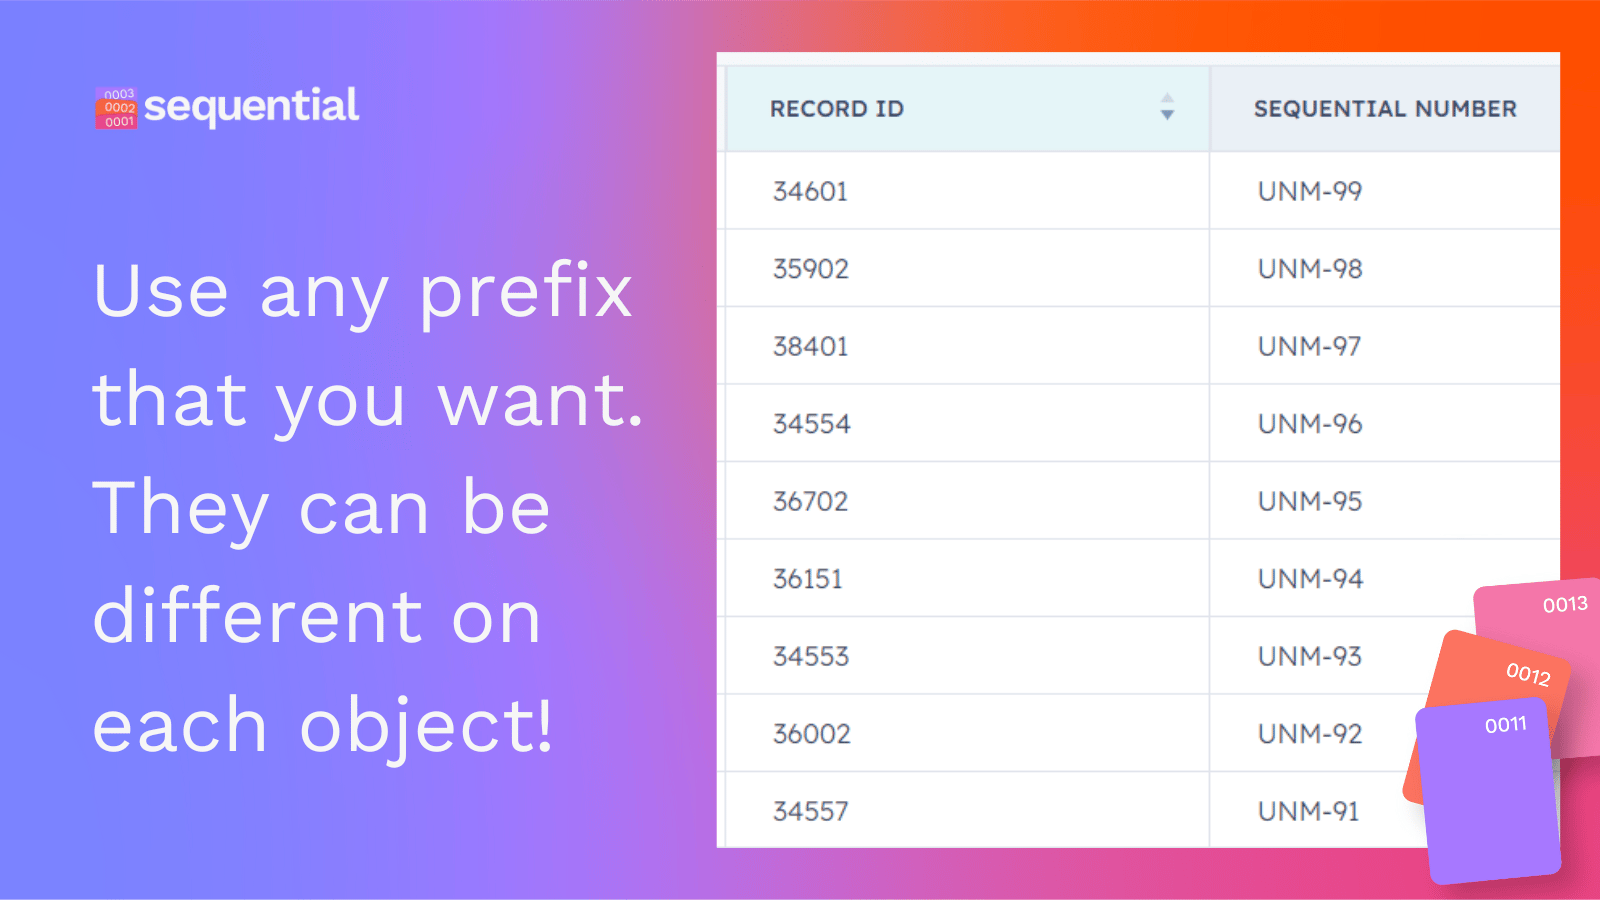 Sequential allows you to use any prefix. They can be different for each object.